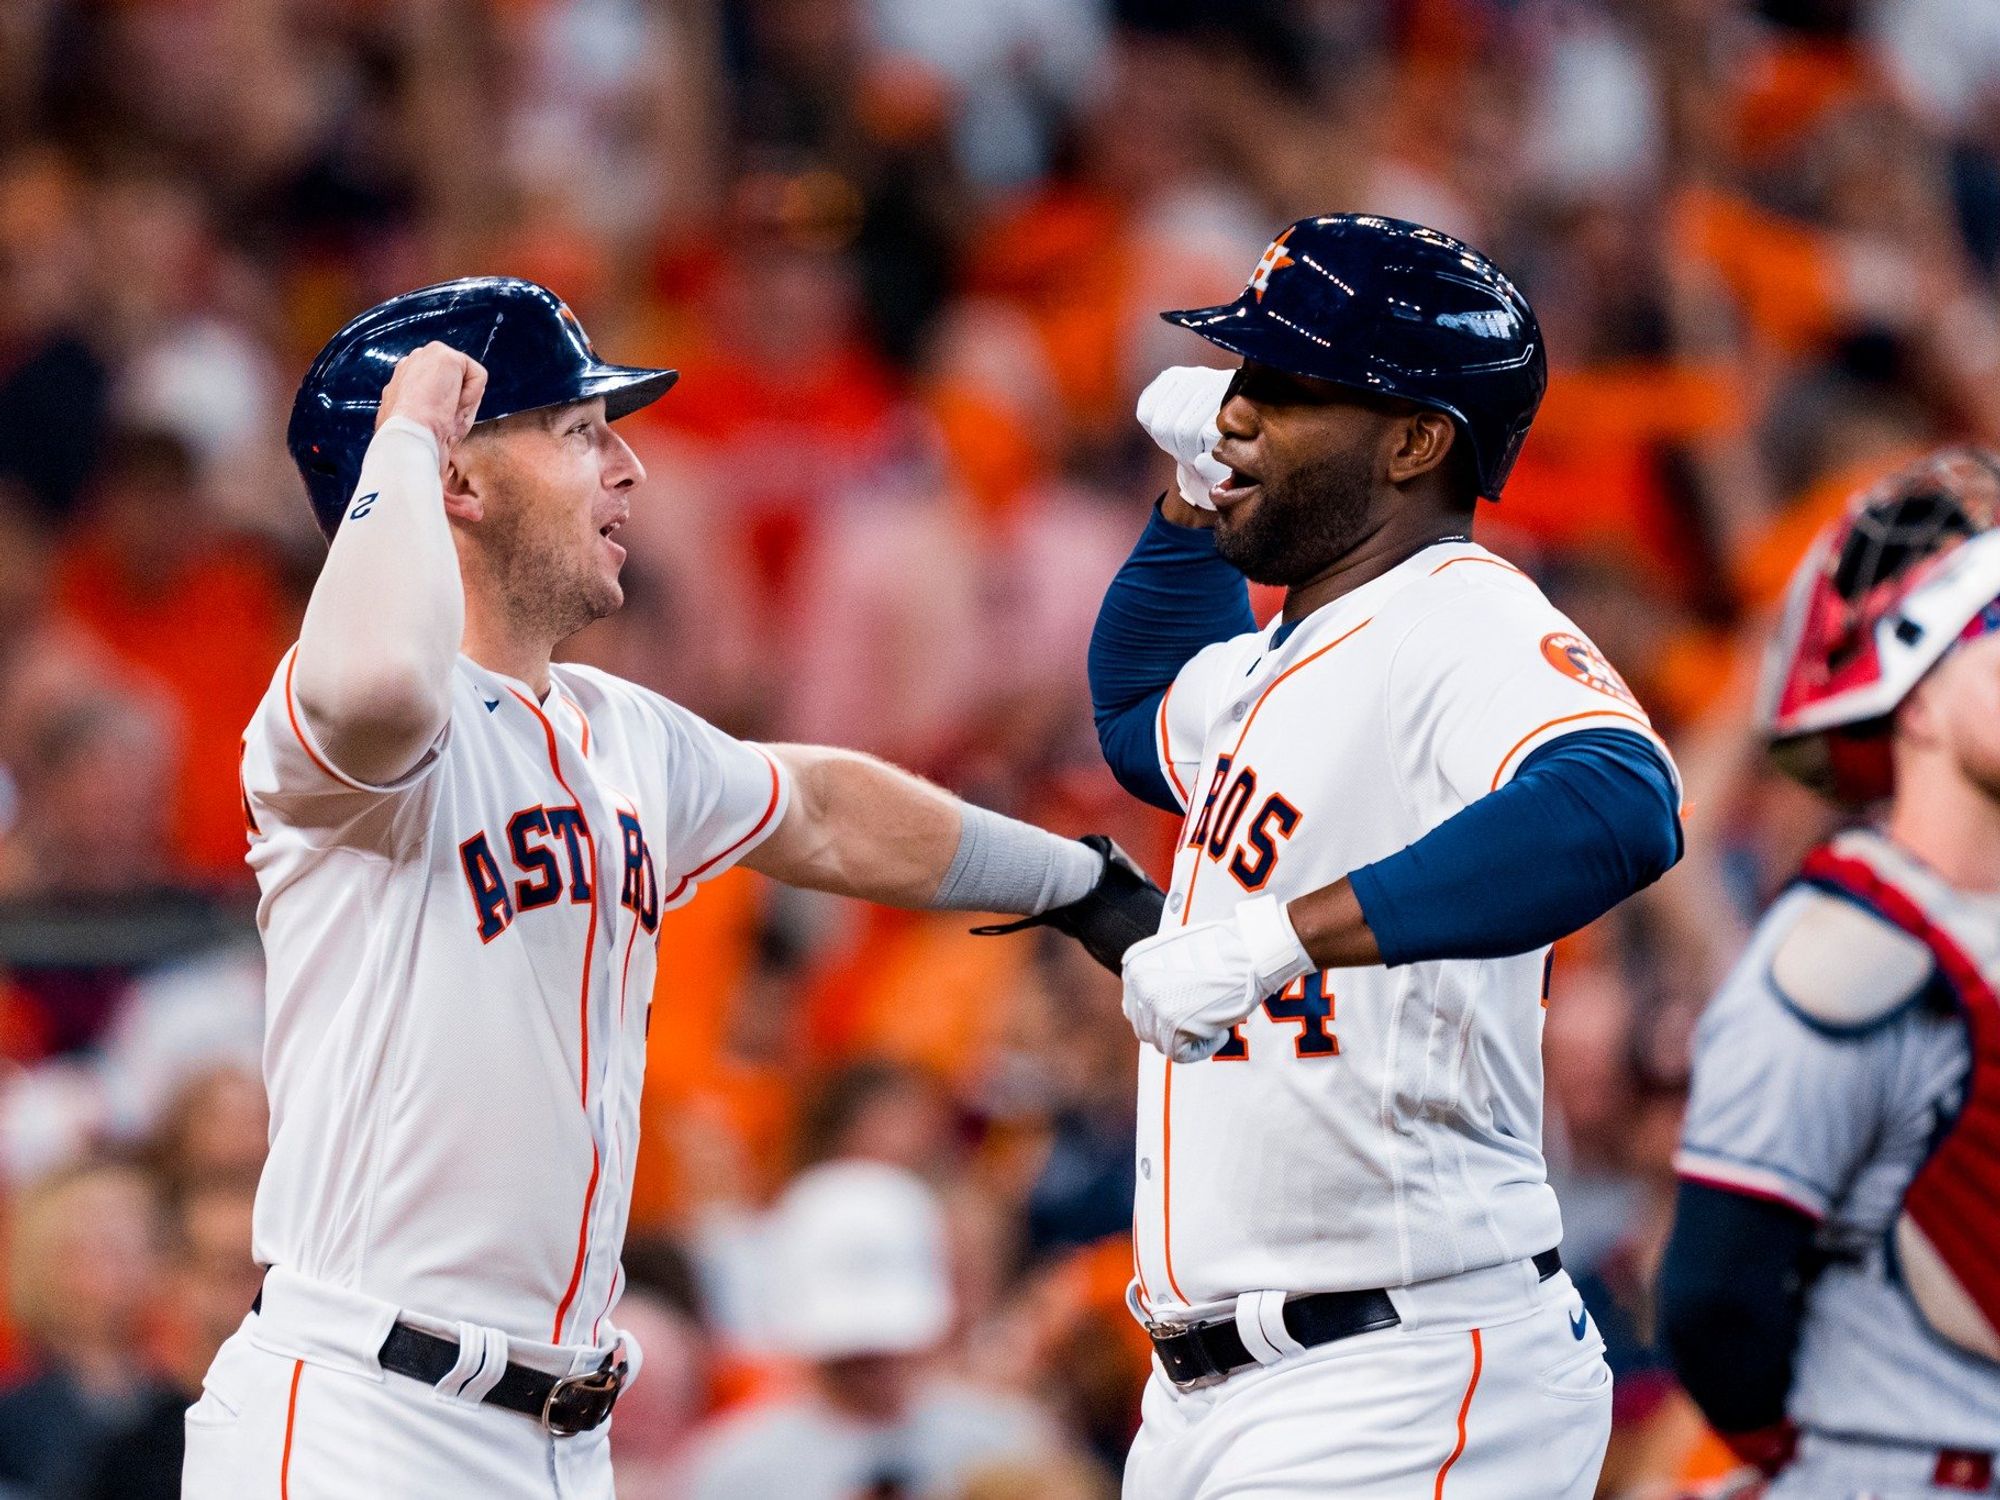 Houston Astros and buzzy brewery host official Game 3 and 4 watch parties  this week - CultureMap Houston